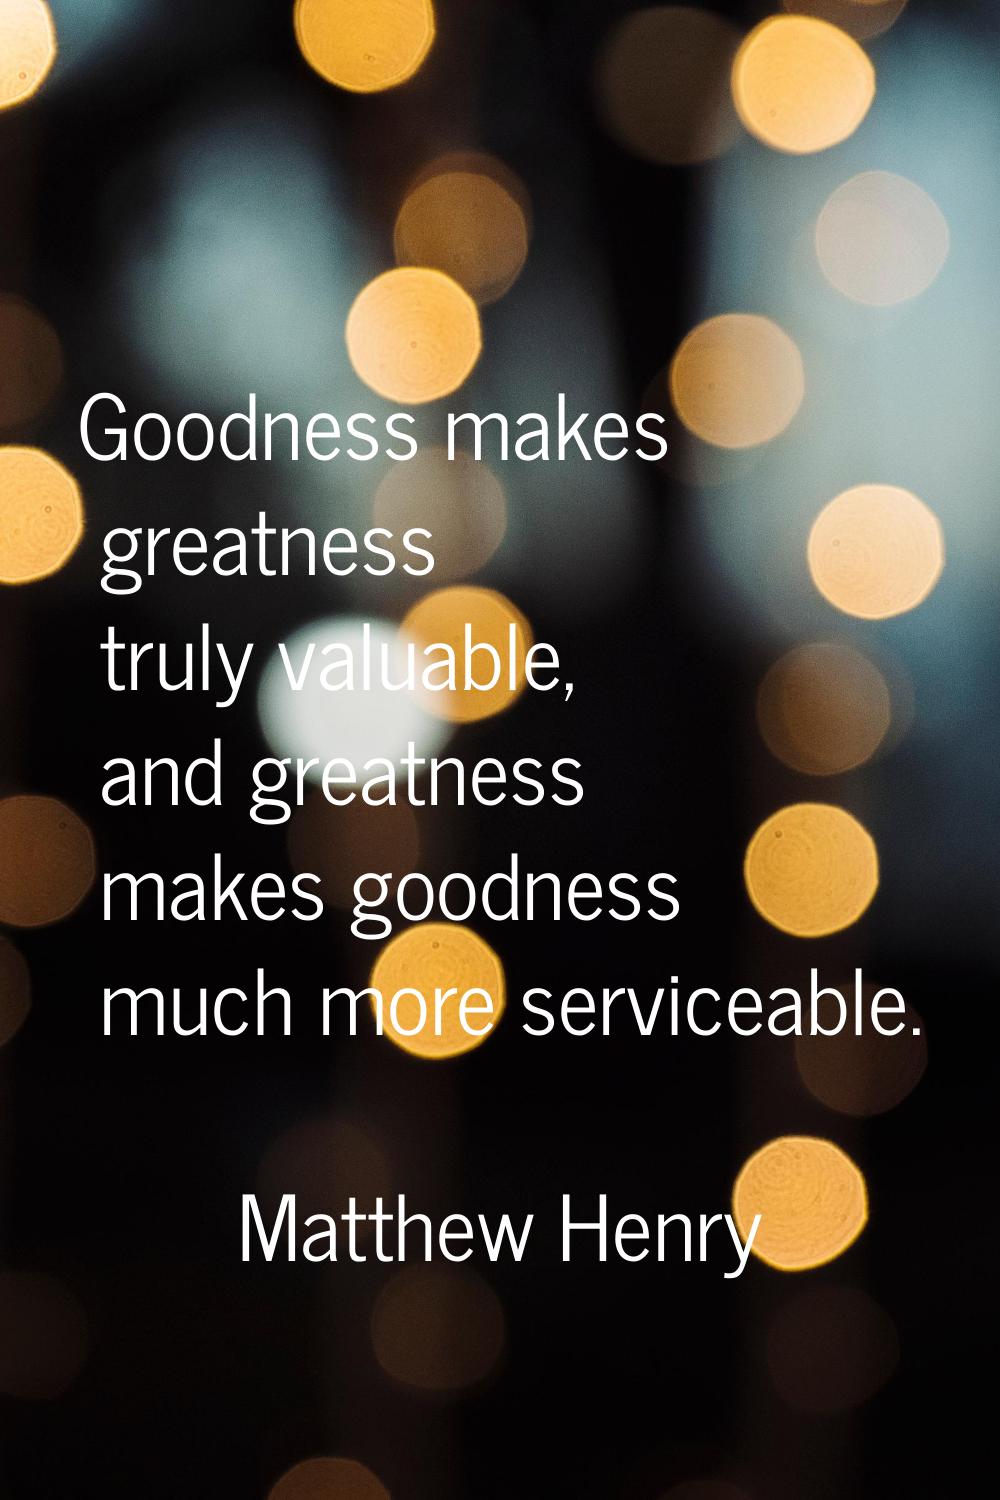 Goodness makes greatness truly valuable, and greatness makes goodness much more serviceable.